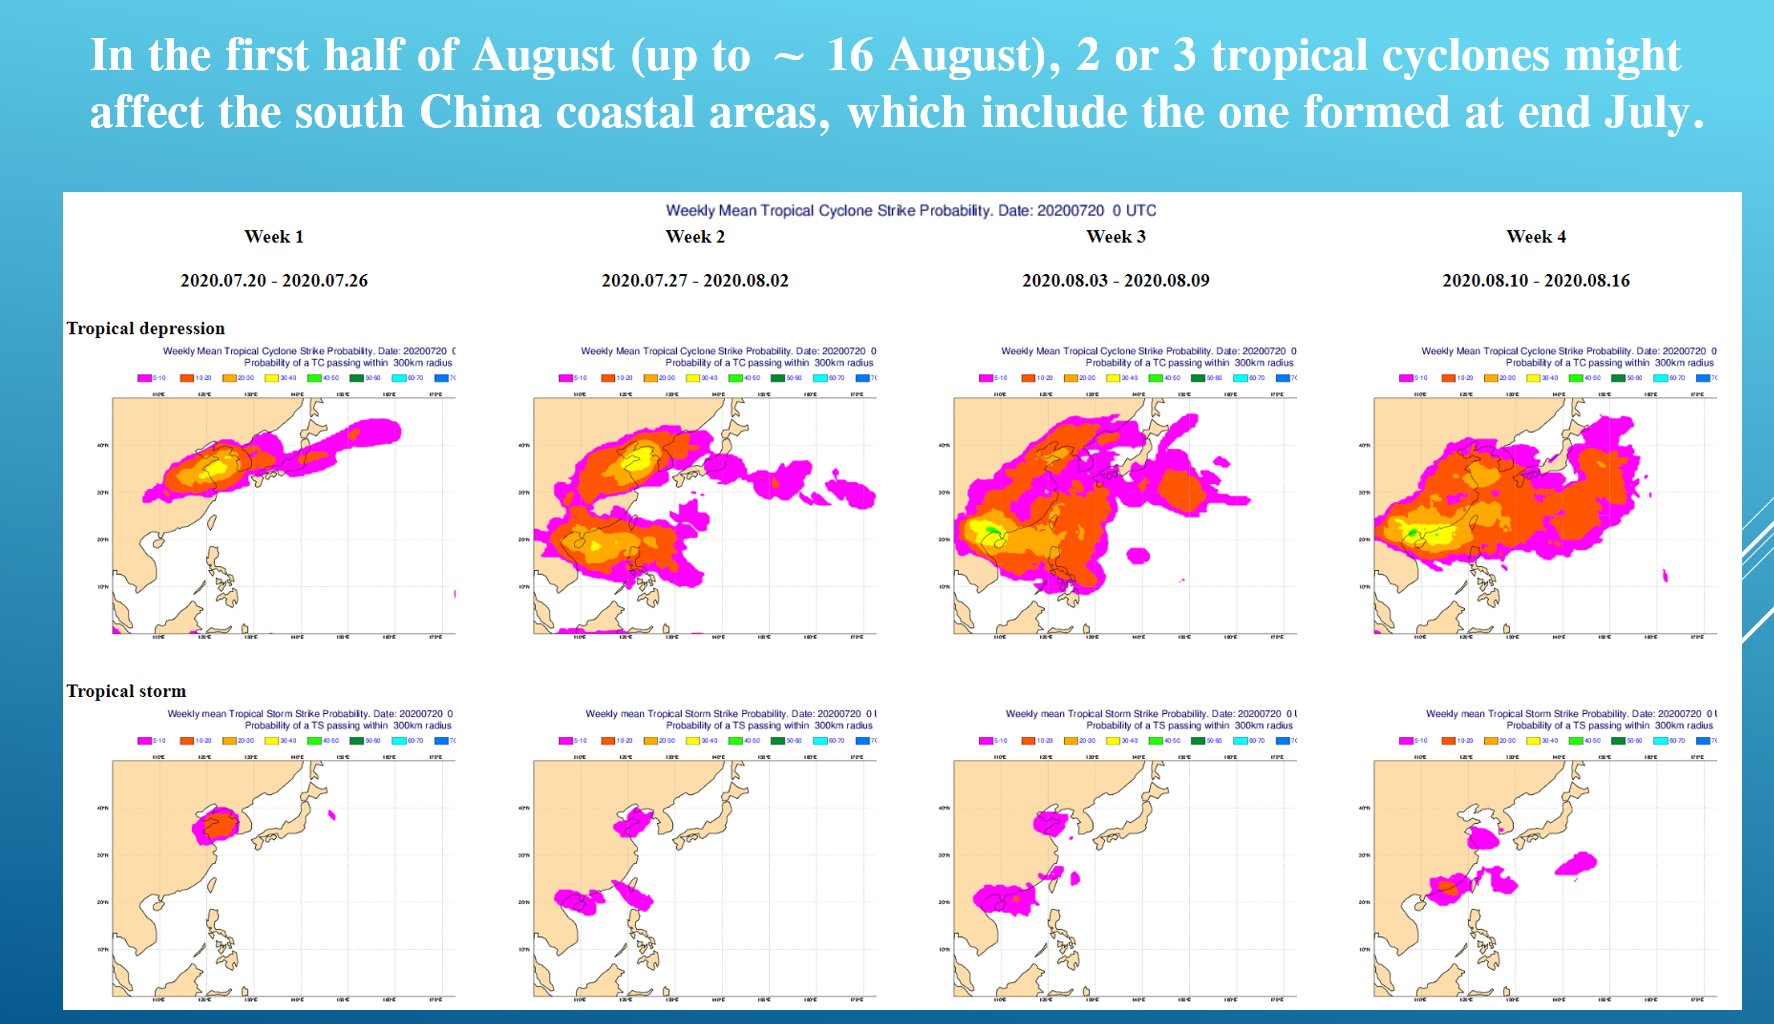 Figure 1: Probabilities of occurrence of low pressure areas in a 4-week window given in July 2020. It happened that several tropical cyclones had emerged over the South China Sea during this period though the strengths and timing of the systems were not captured completely.